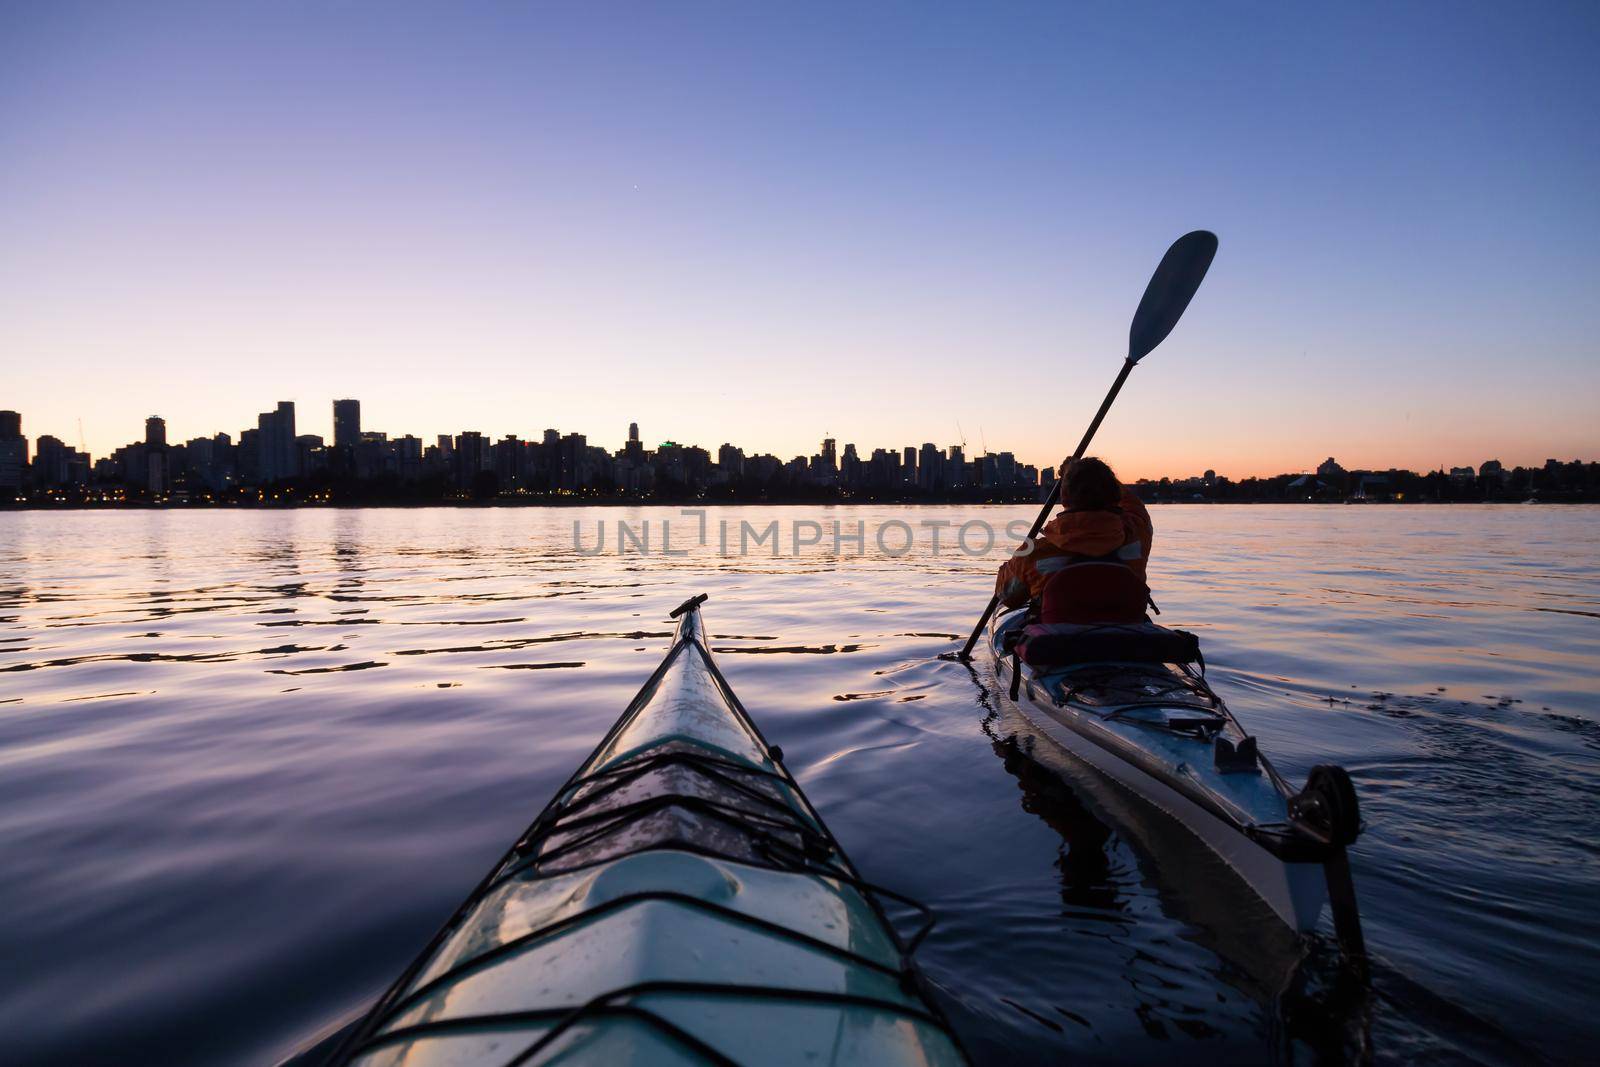 Sea Kayaking during a vibrant sunrise with the city skyline in the background. Taken in Downtown Vancouver, British Columbia, Canada.